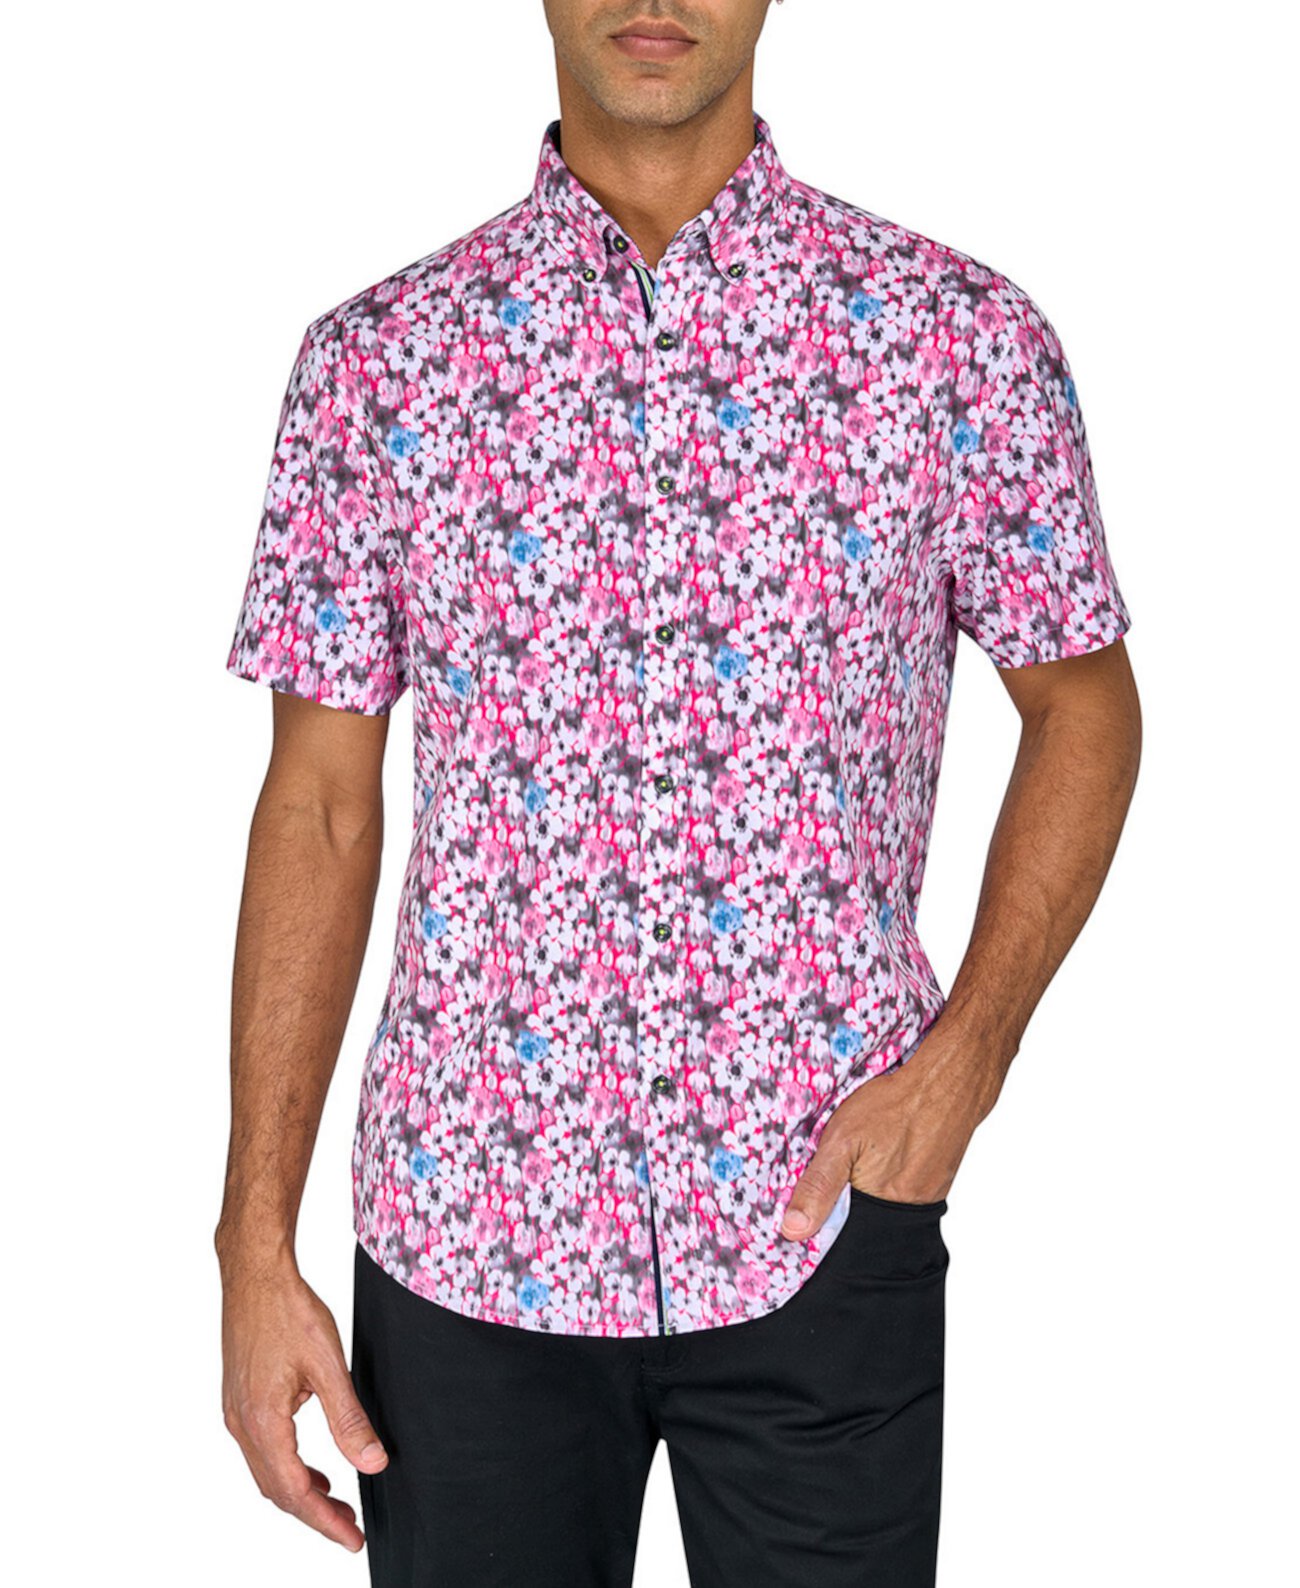 Men's Regular-Fit Non-Iron Performance Stretch Blurred Floral Button-Down Shirt Society of Threads